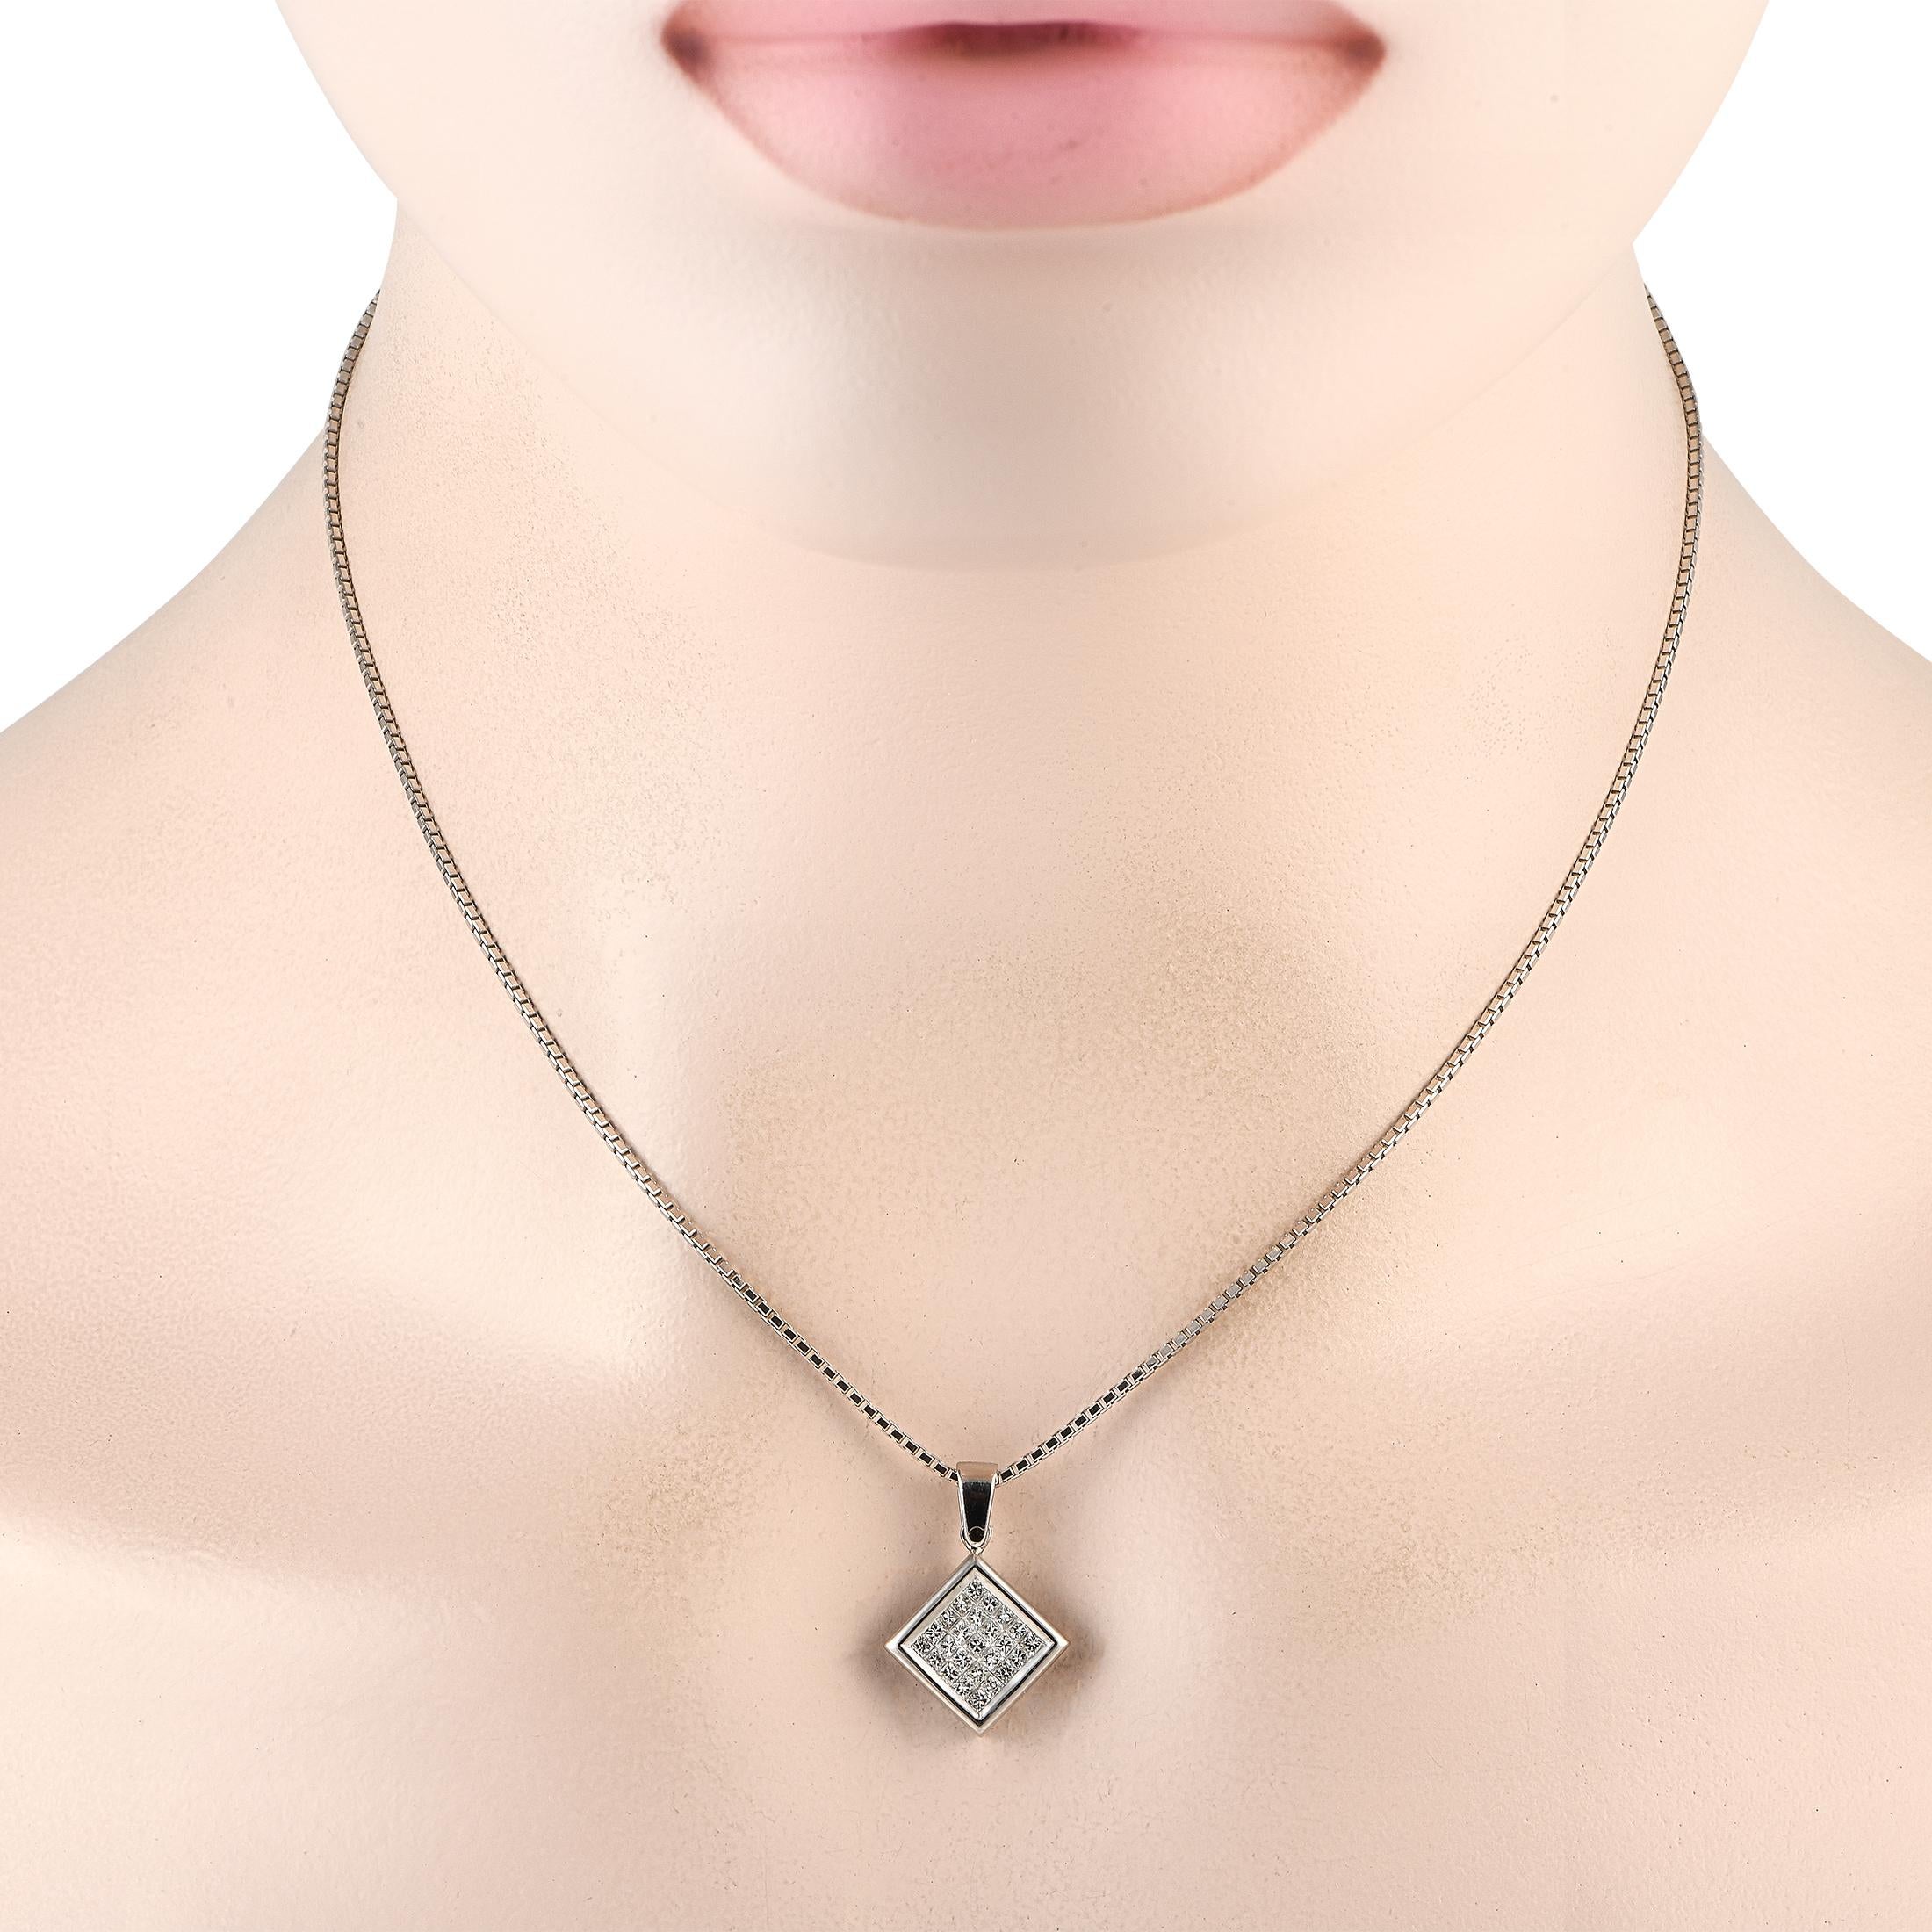 There\u2019s something timeless about this elegant necklace. Suspended from a sleek 16\u201d box chain, you\u2019ll find a diamond-shaped pendant that comes to life thanks to 0.70 carats of sparkling inset Diamonds. The pendant is crafted from pure